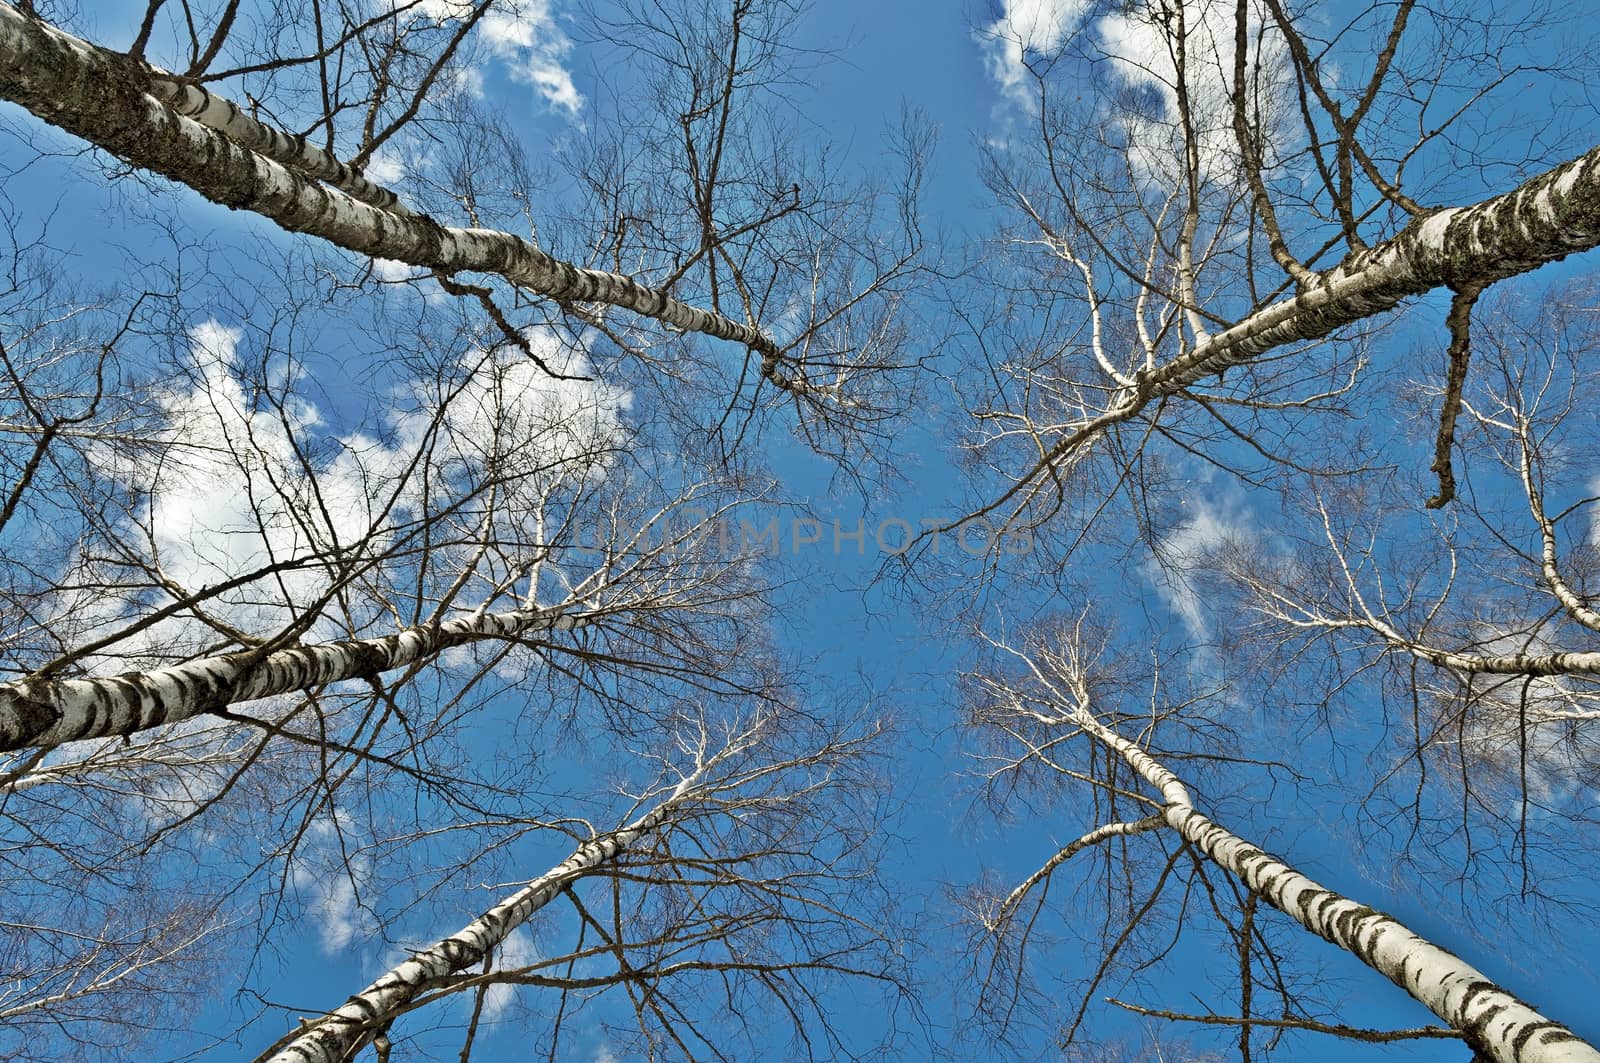 Top of bare birch trees on blue sky background in early spring